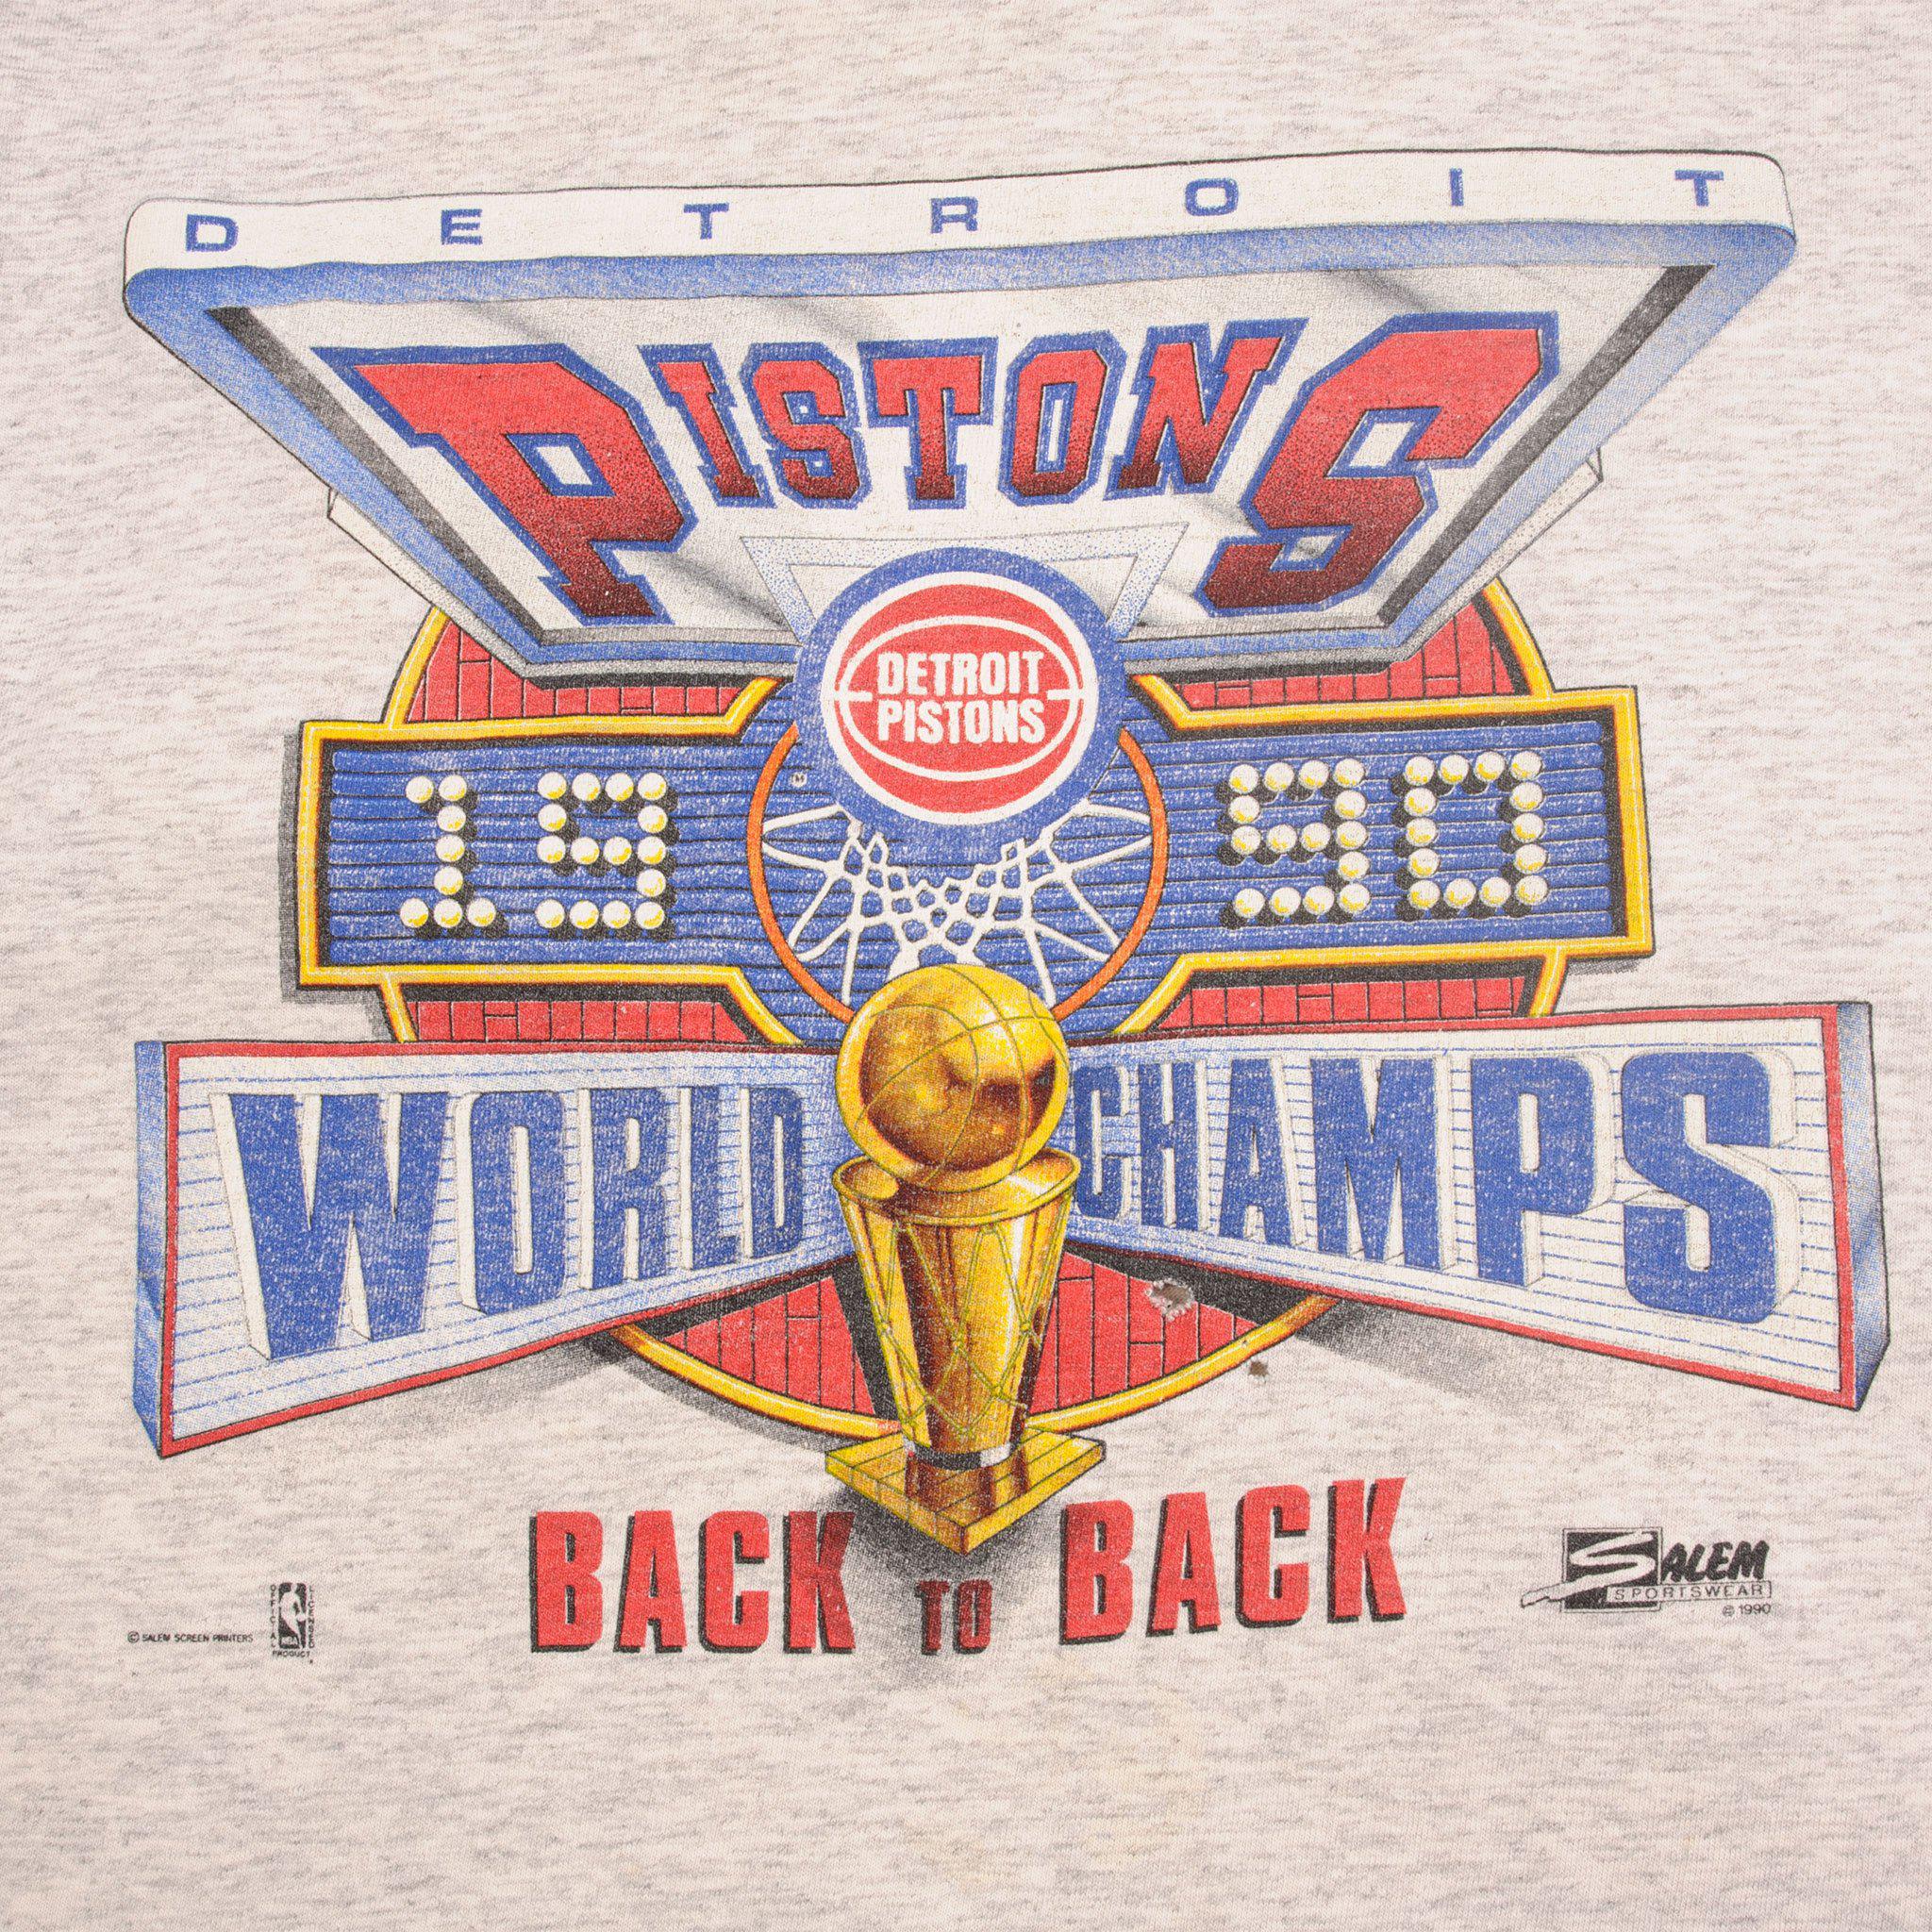 Buy Detroit Pistons Vintage Shirt Online In India -  India